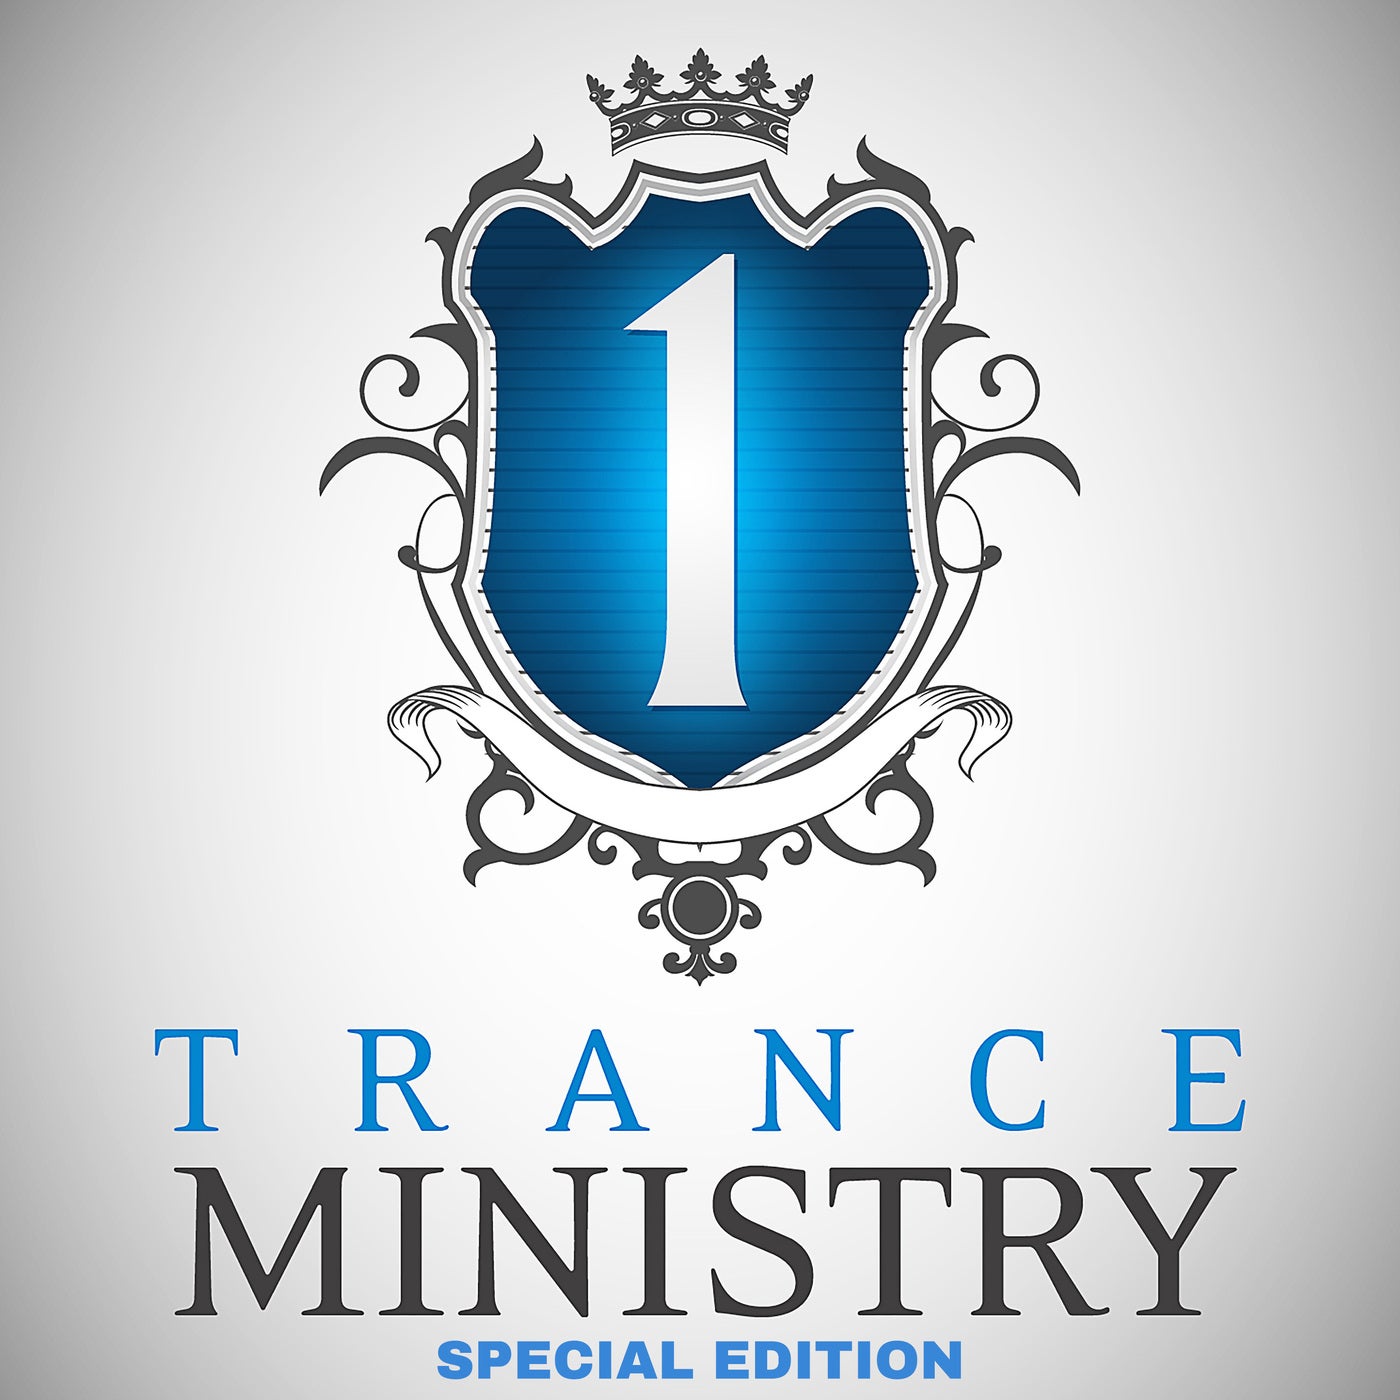 Trance Ministry, Vol. 1 Special Edition